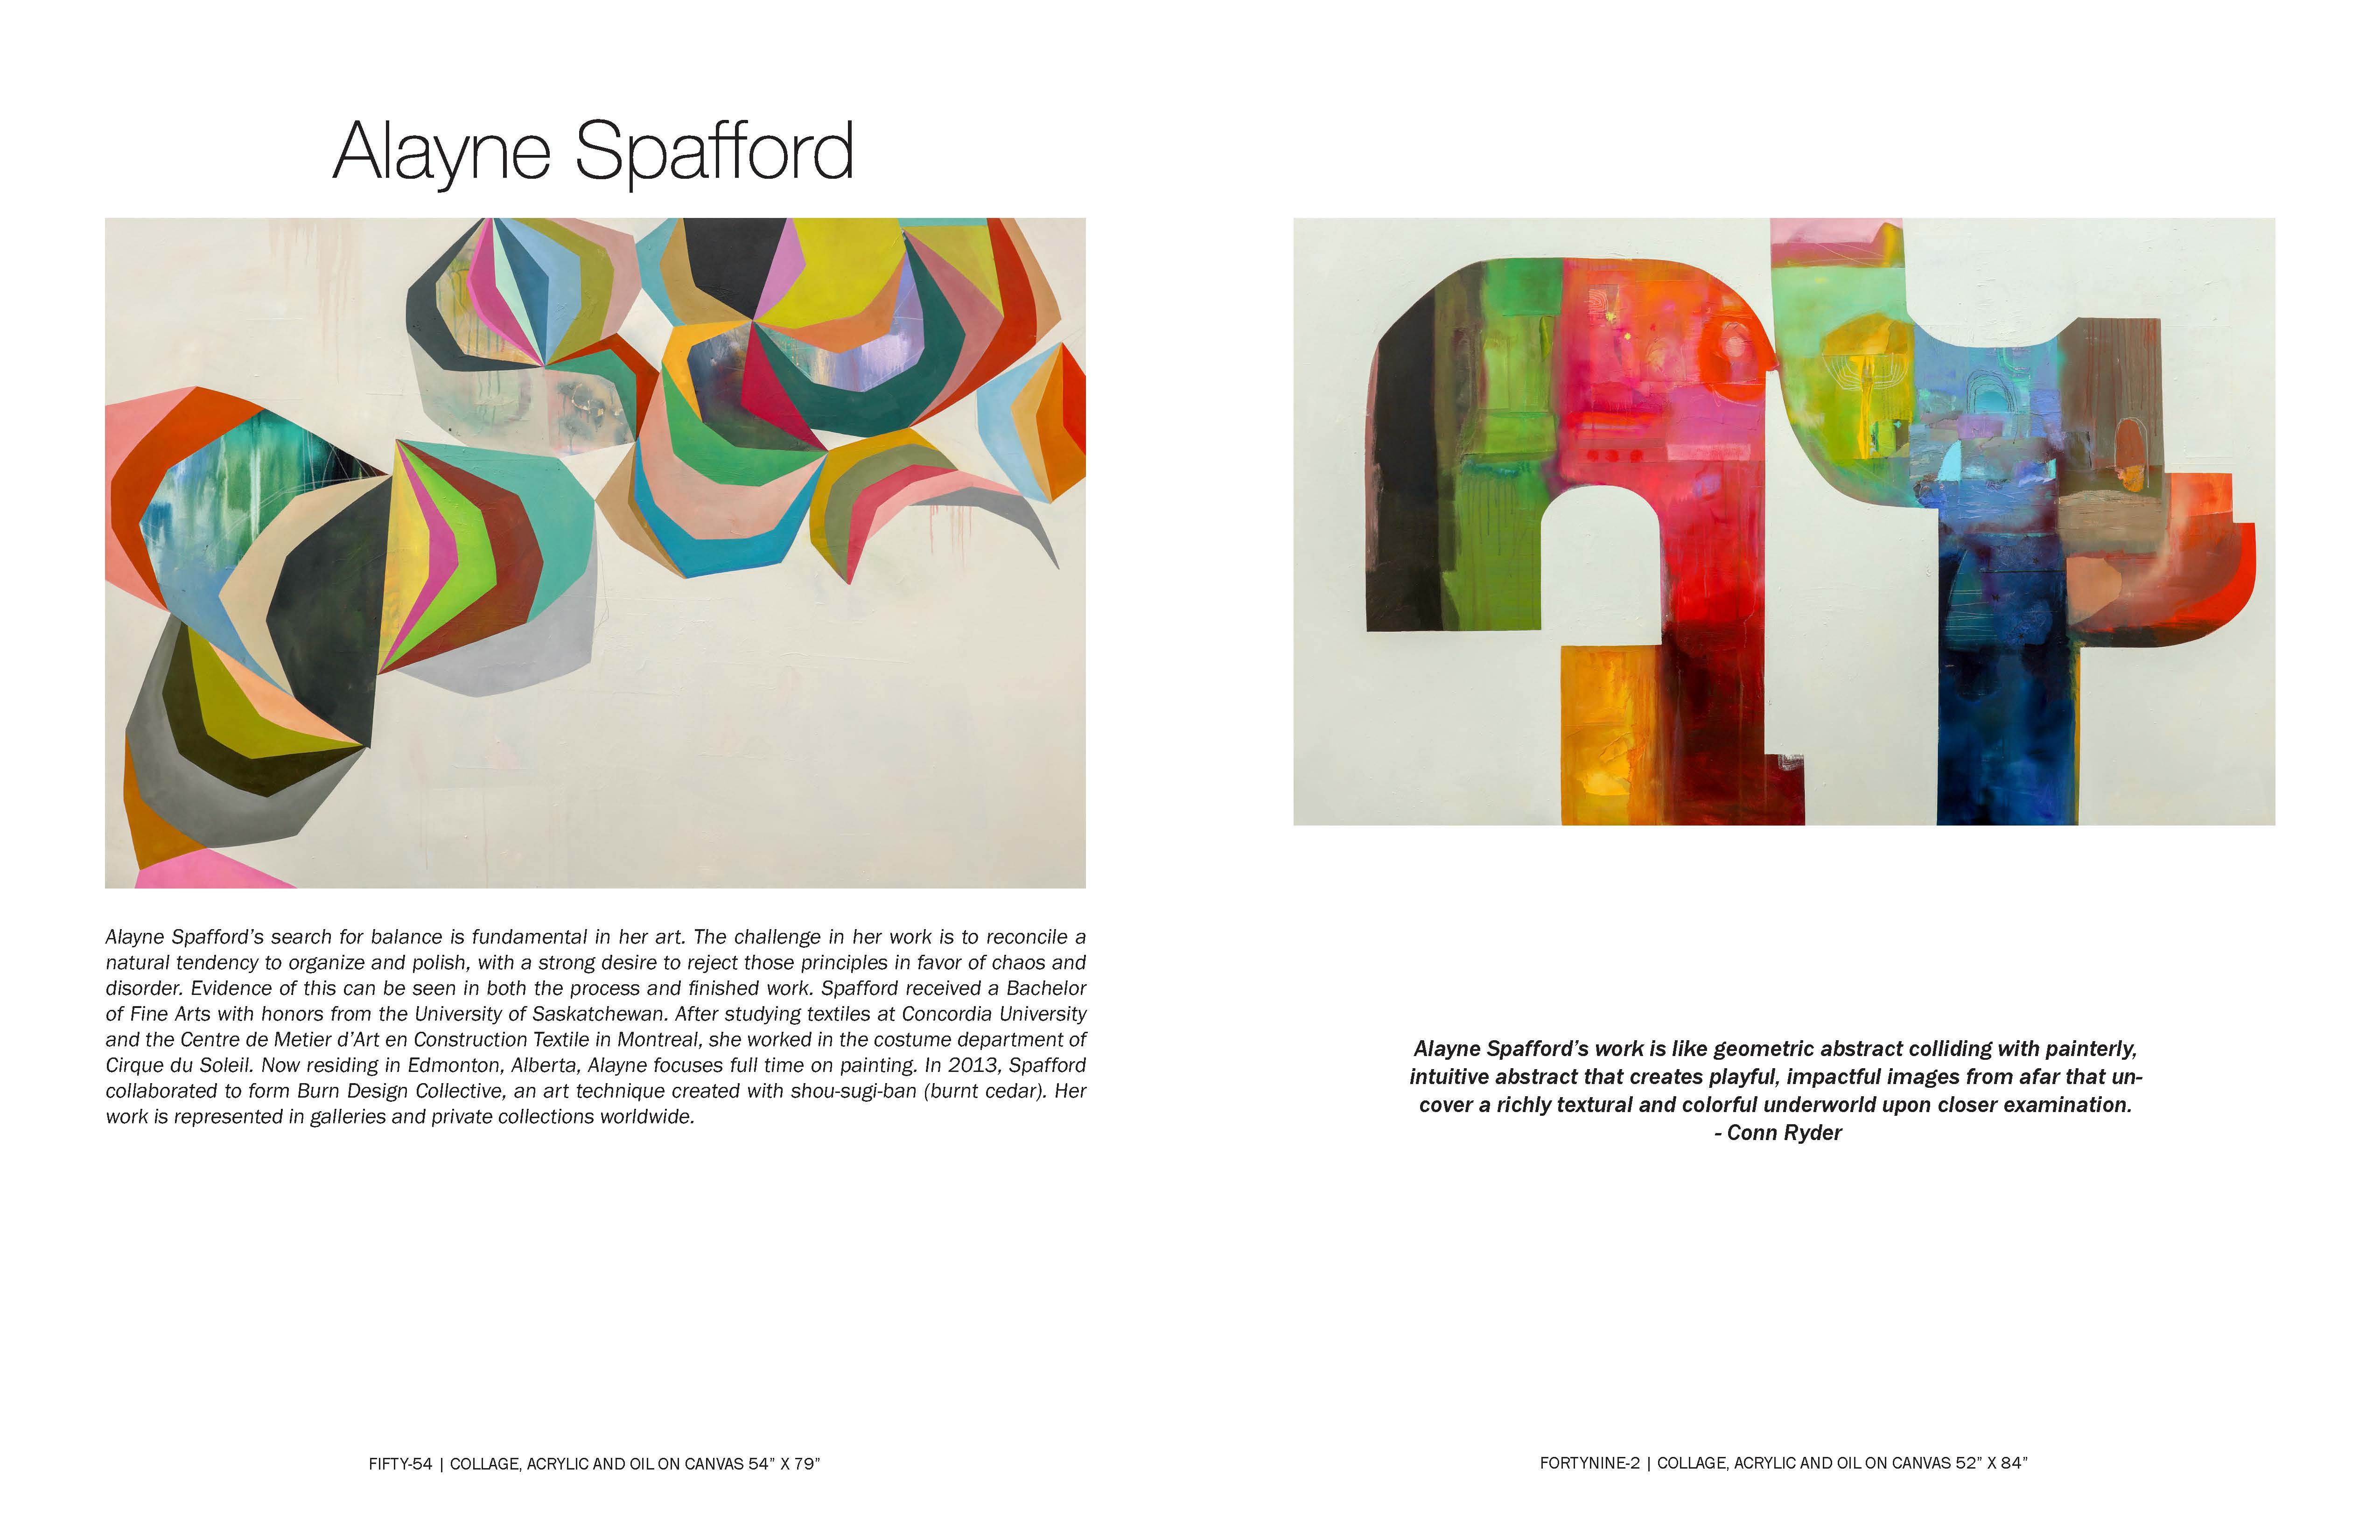 Marketing catalog images of abstract artworks